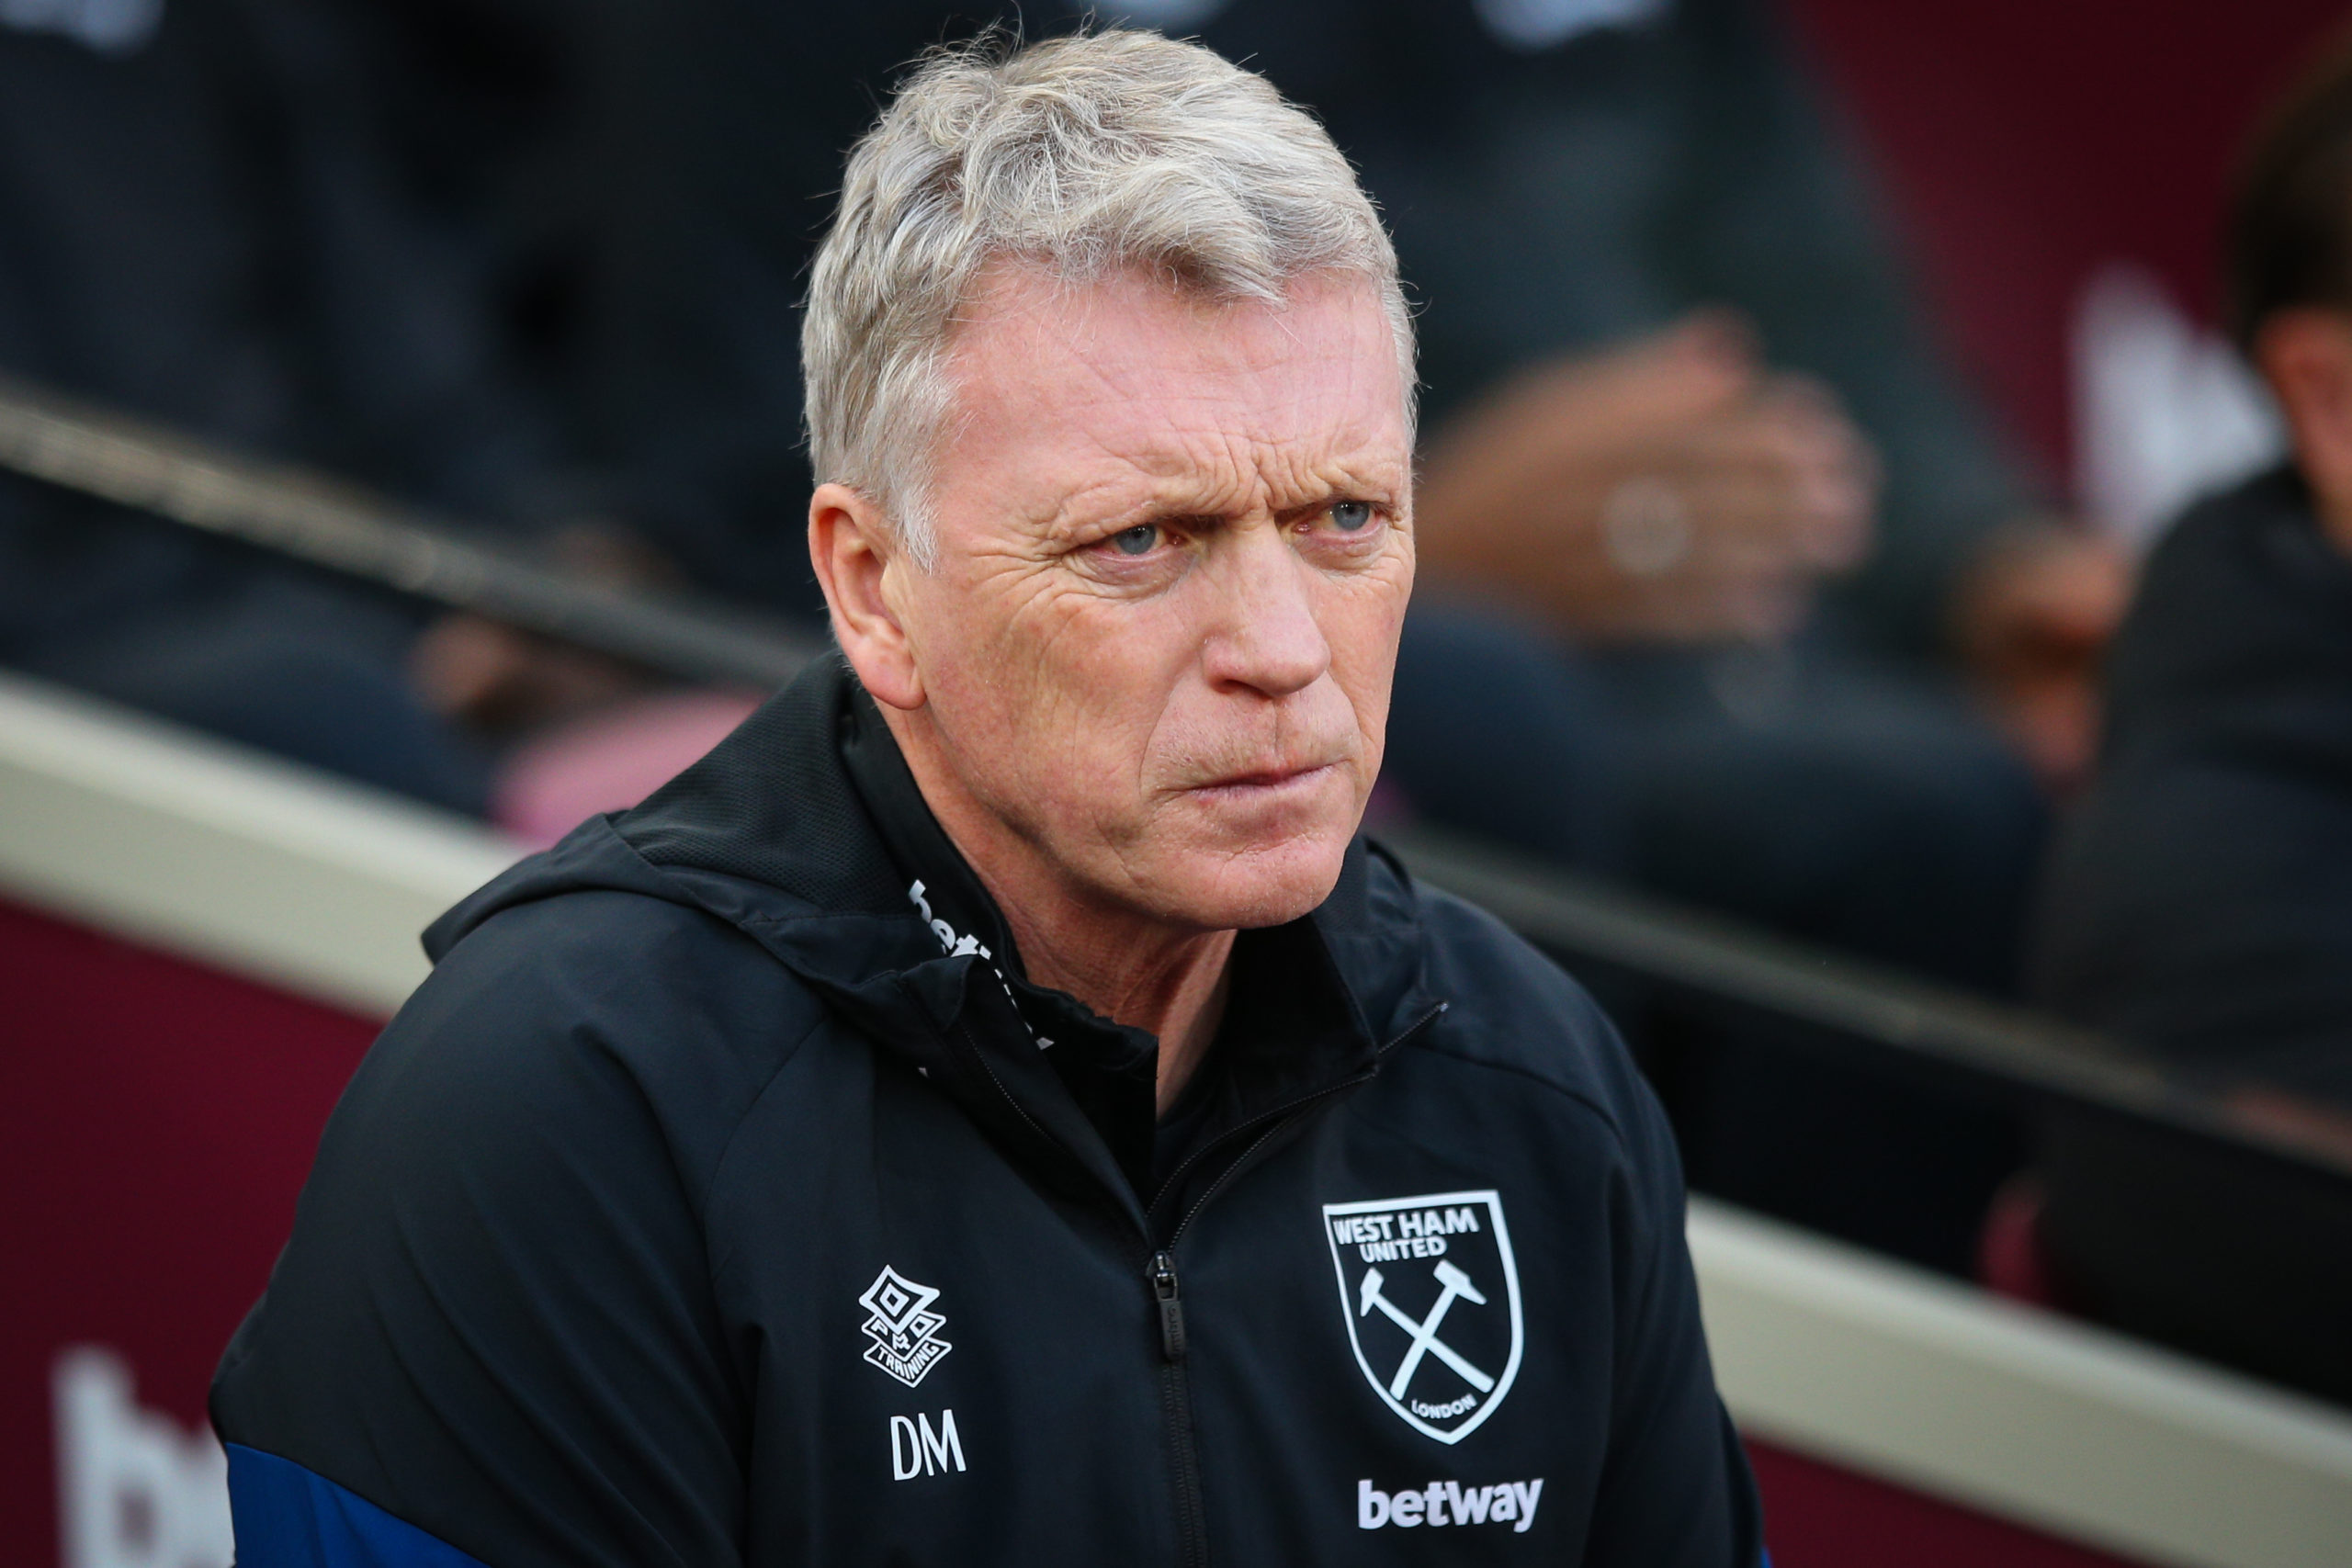 David Moyes frustrated by West Ham striker situation but fans will not be sympathetic